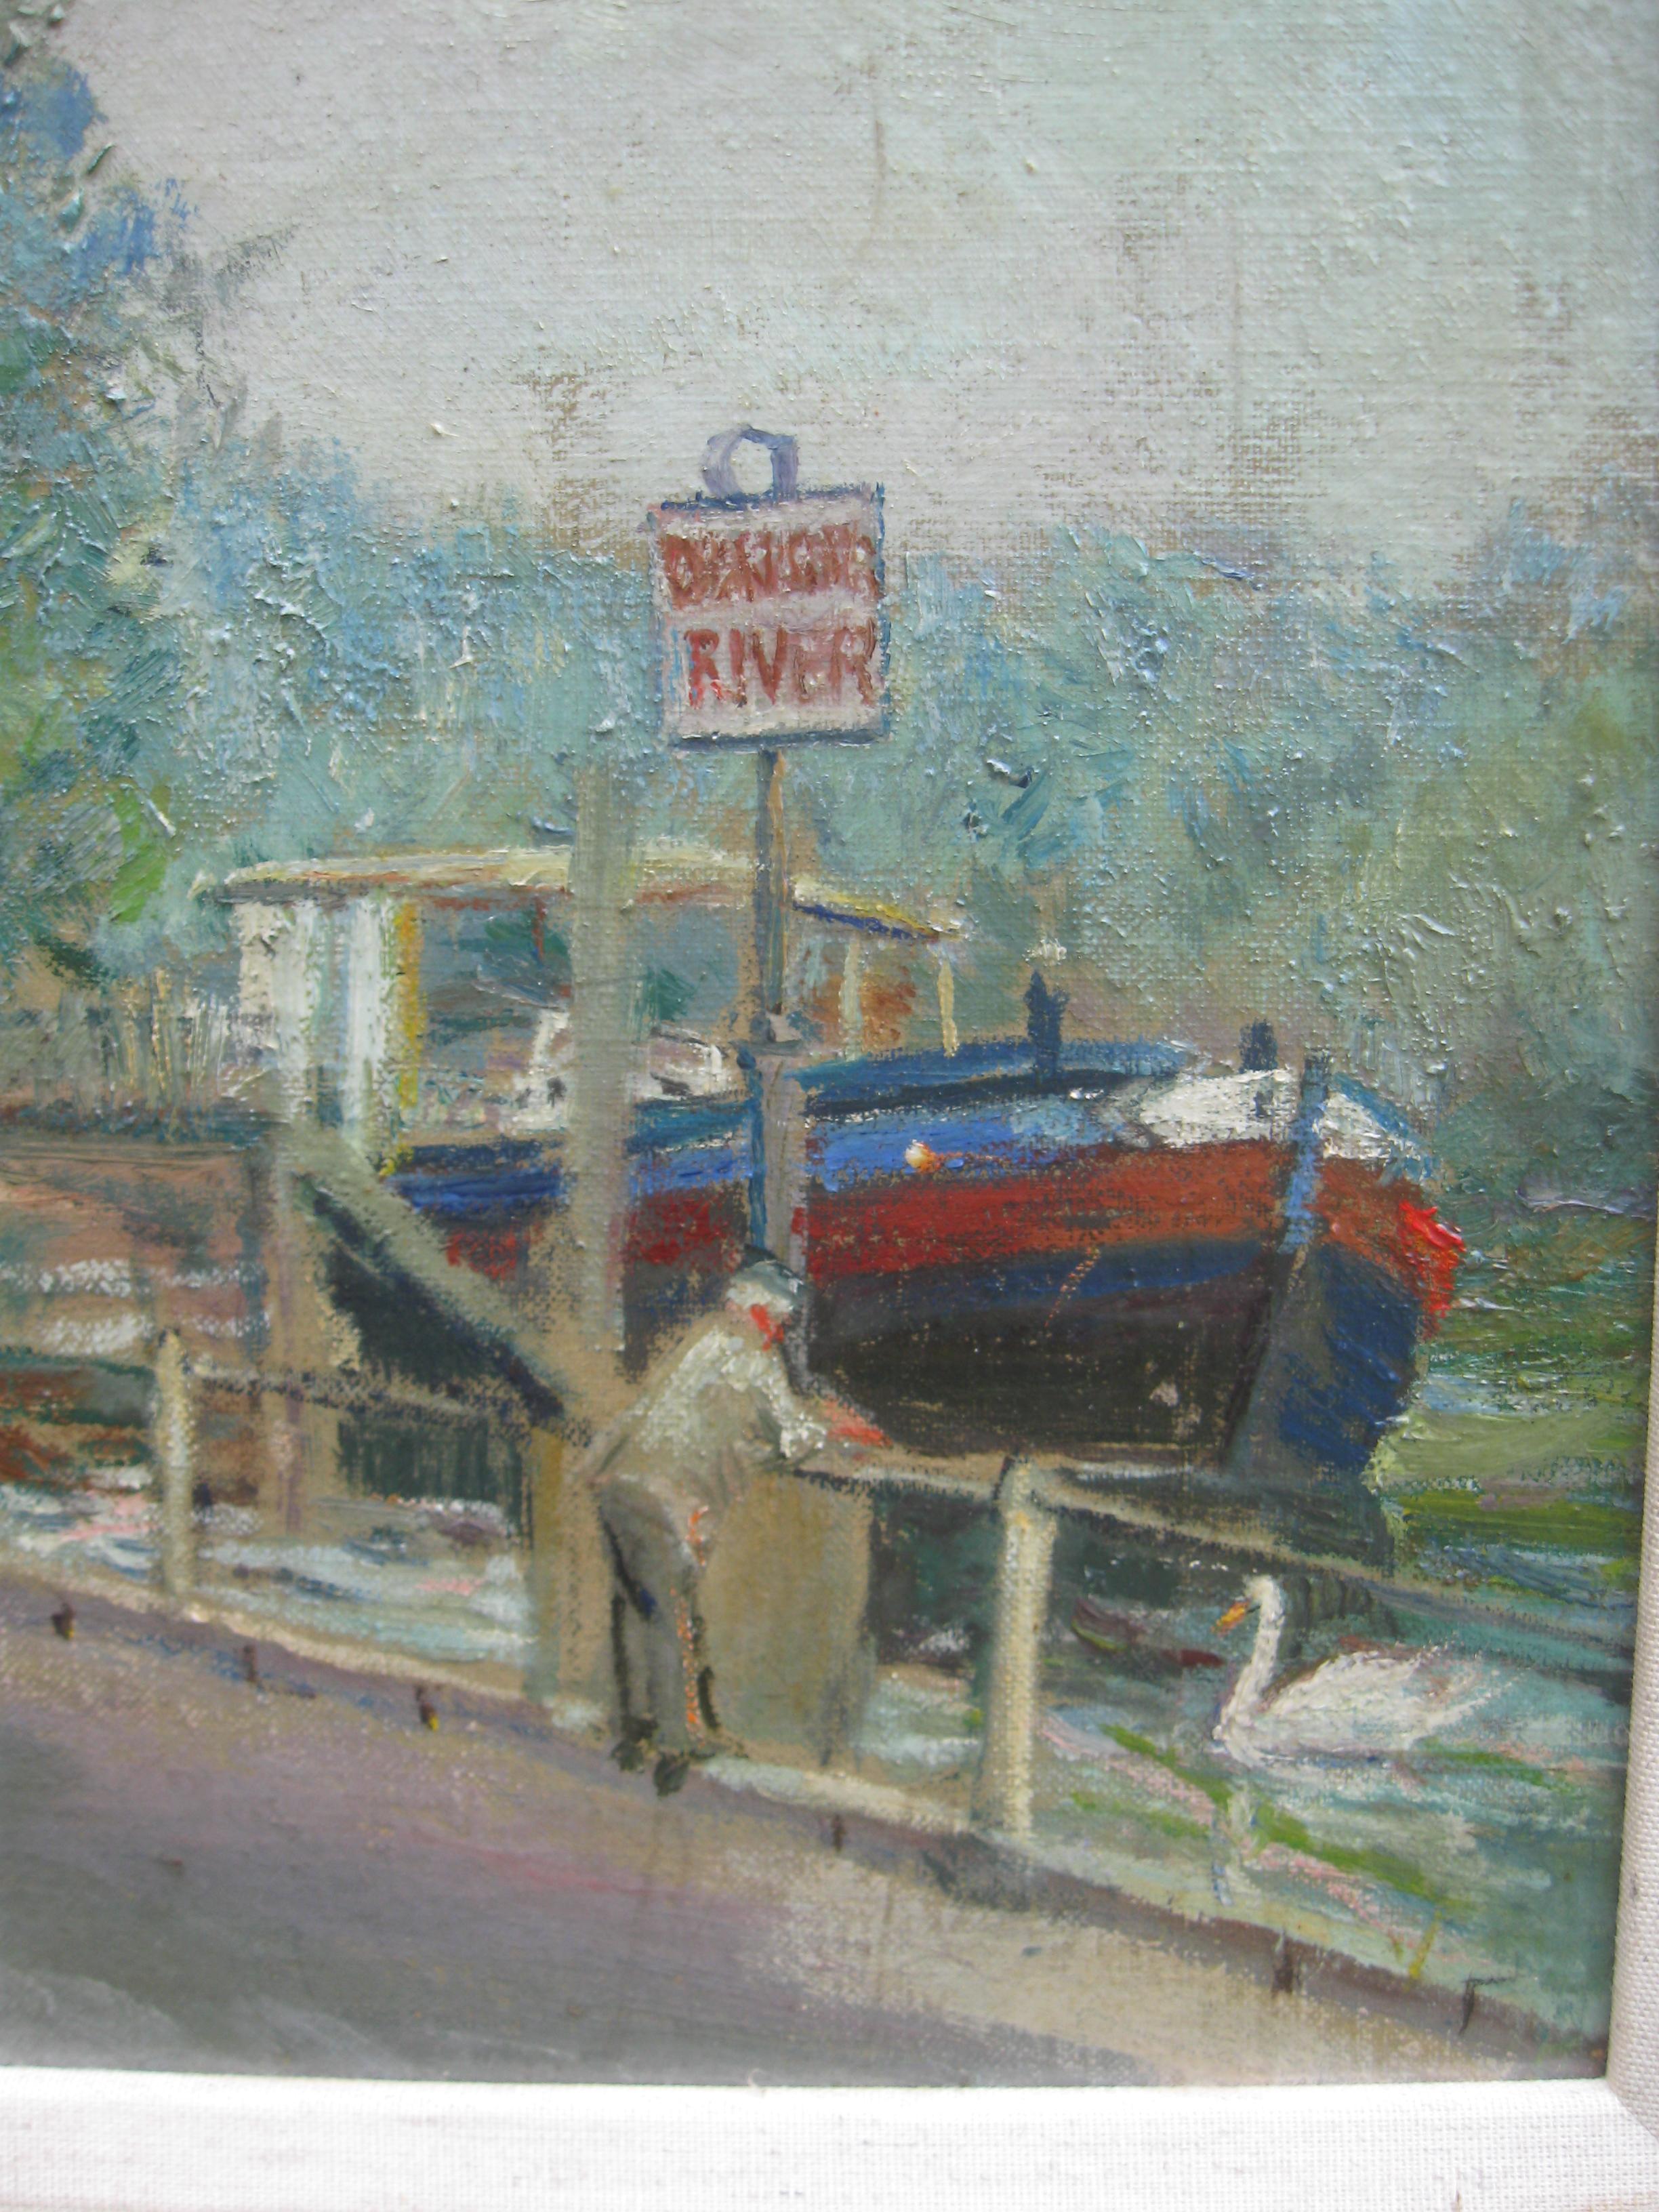 A fine impressionist oil of Chiswick Mall, by The Thames, London circa 1930's-40's by listed artist Josephine Matley Duddle  later Matley-Duddle Ghilchik (1890-1981)
oil on canvas laid on board 41cmx 61cm
good quality gallery frame 54cmx 74cm
A road